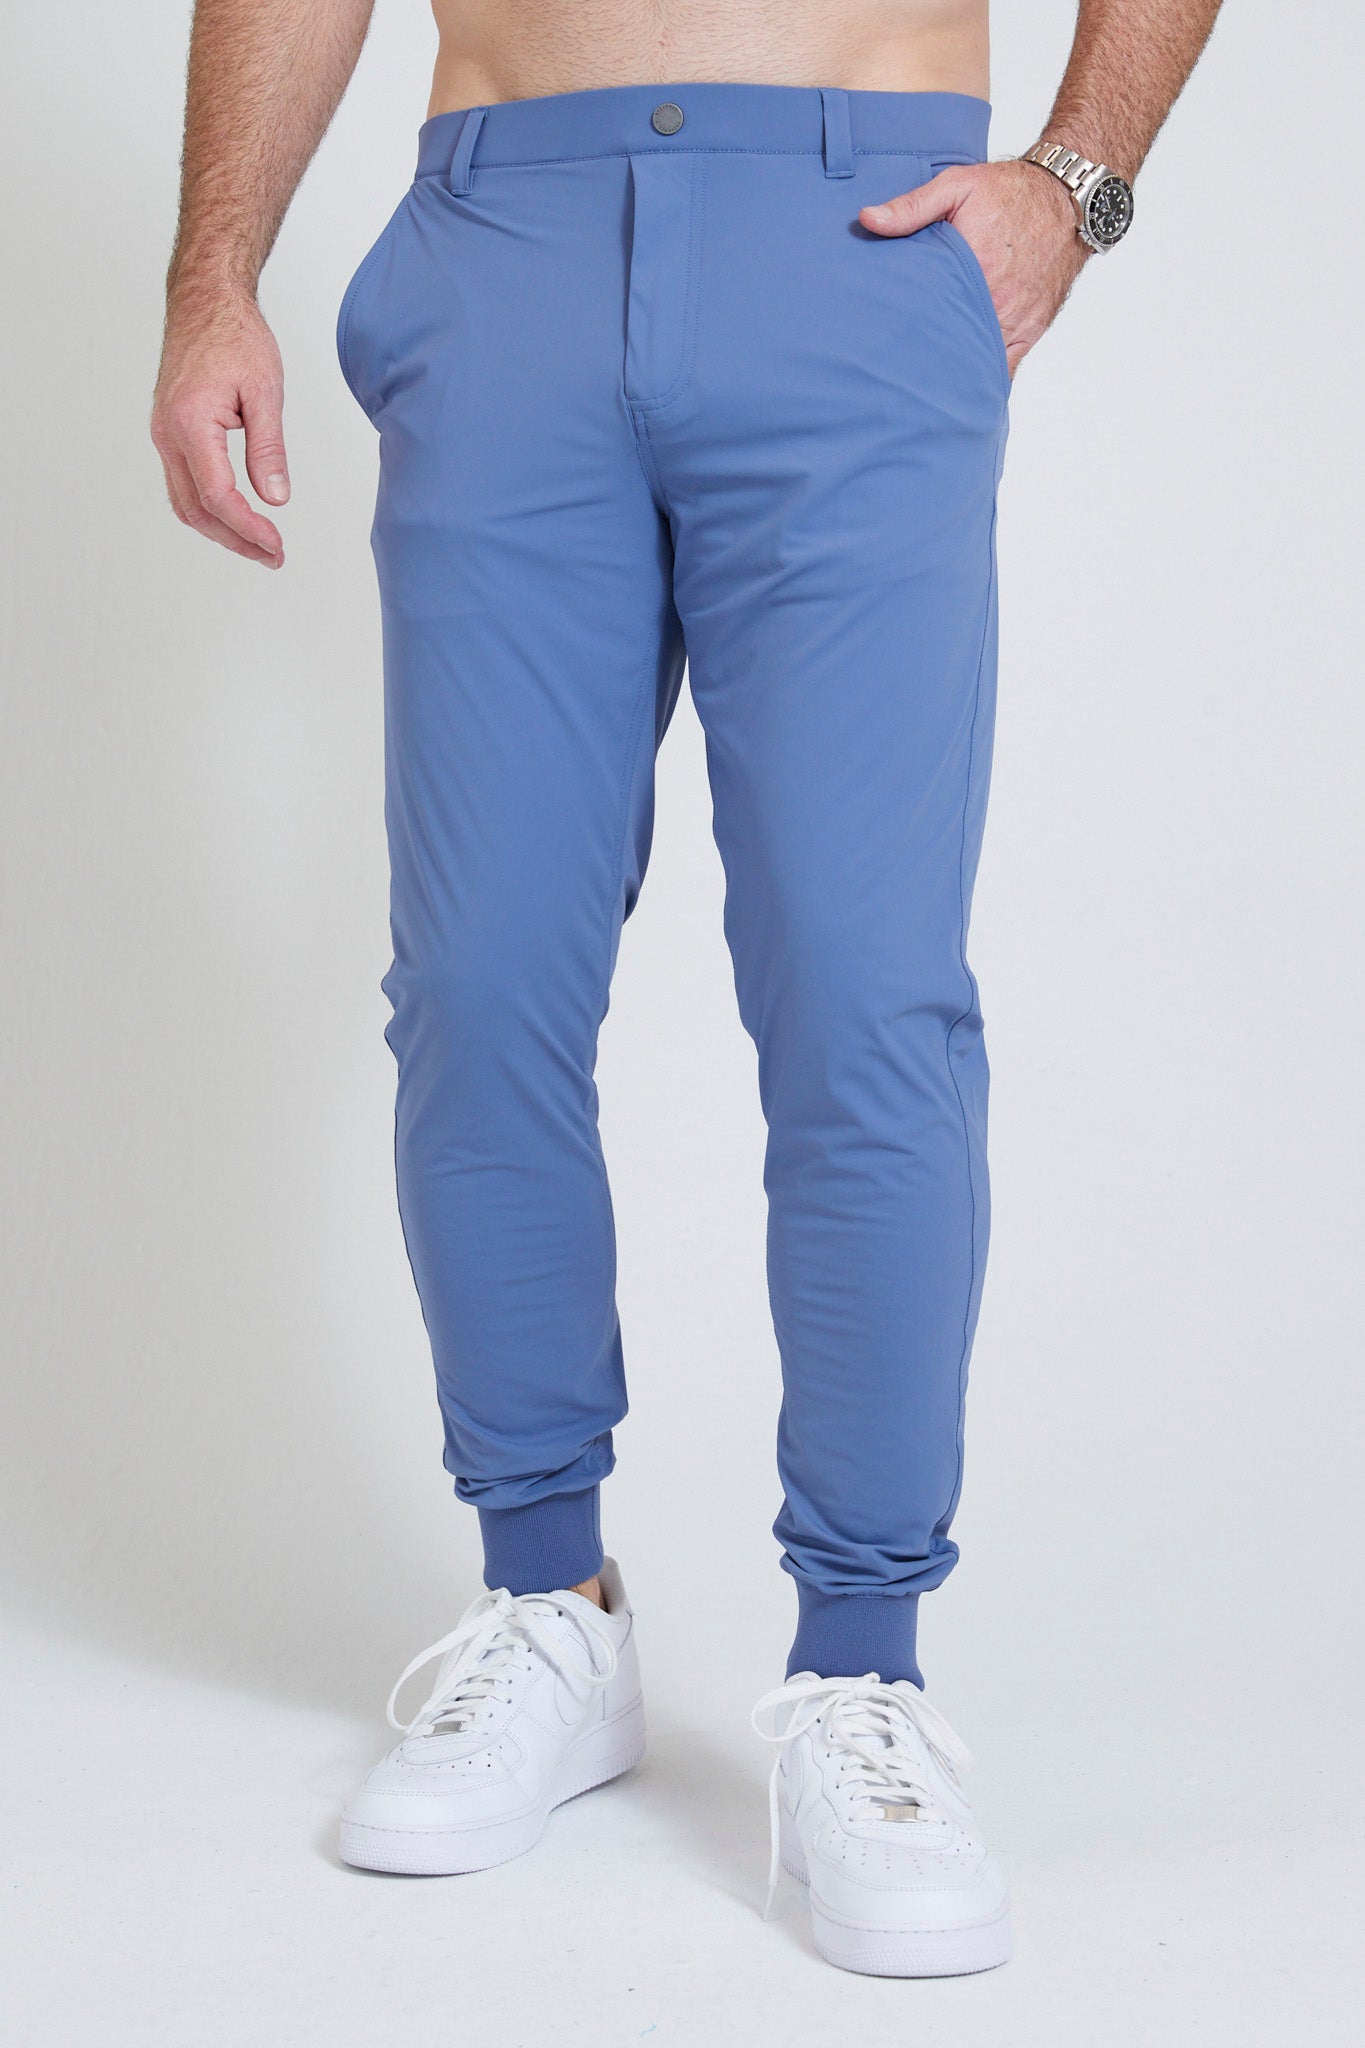 Image of the halliday pull-on jogger in blue horizon